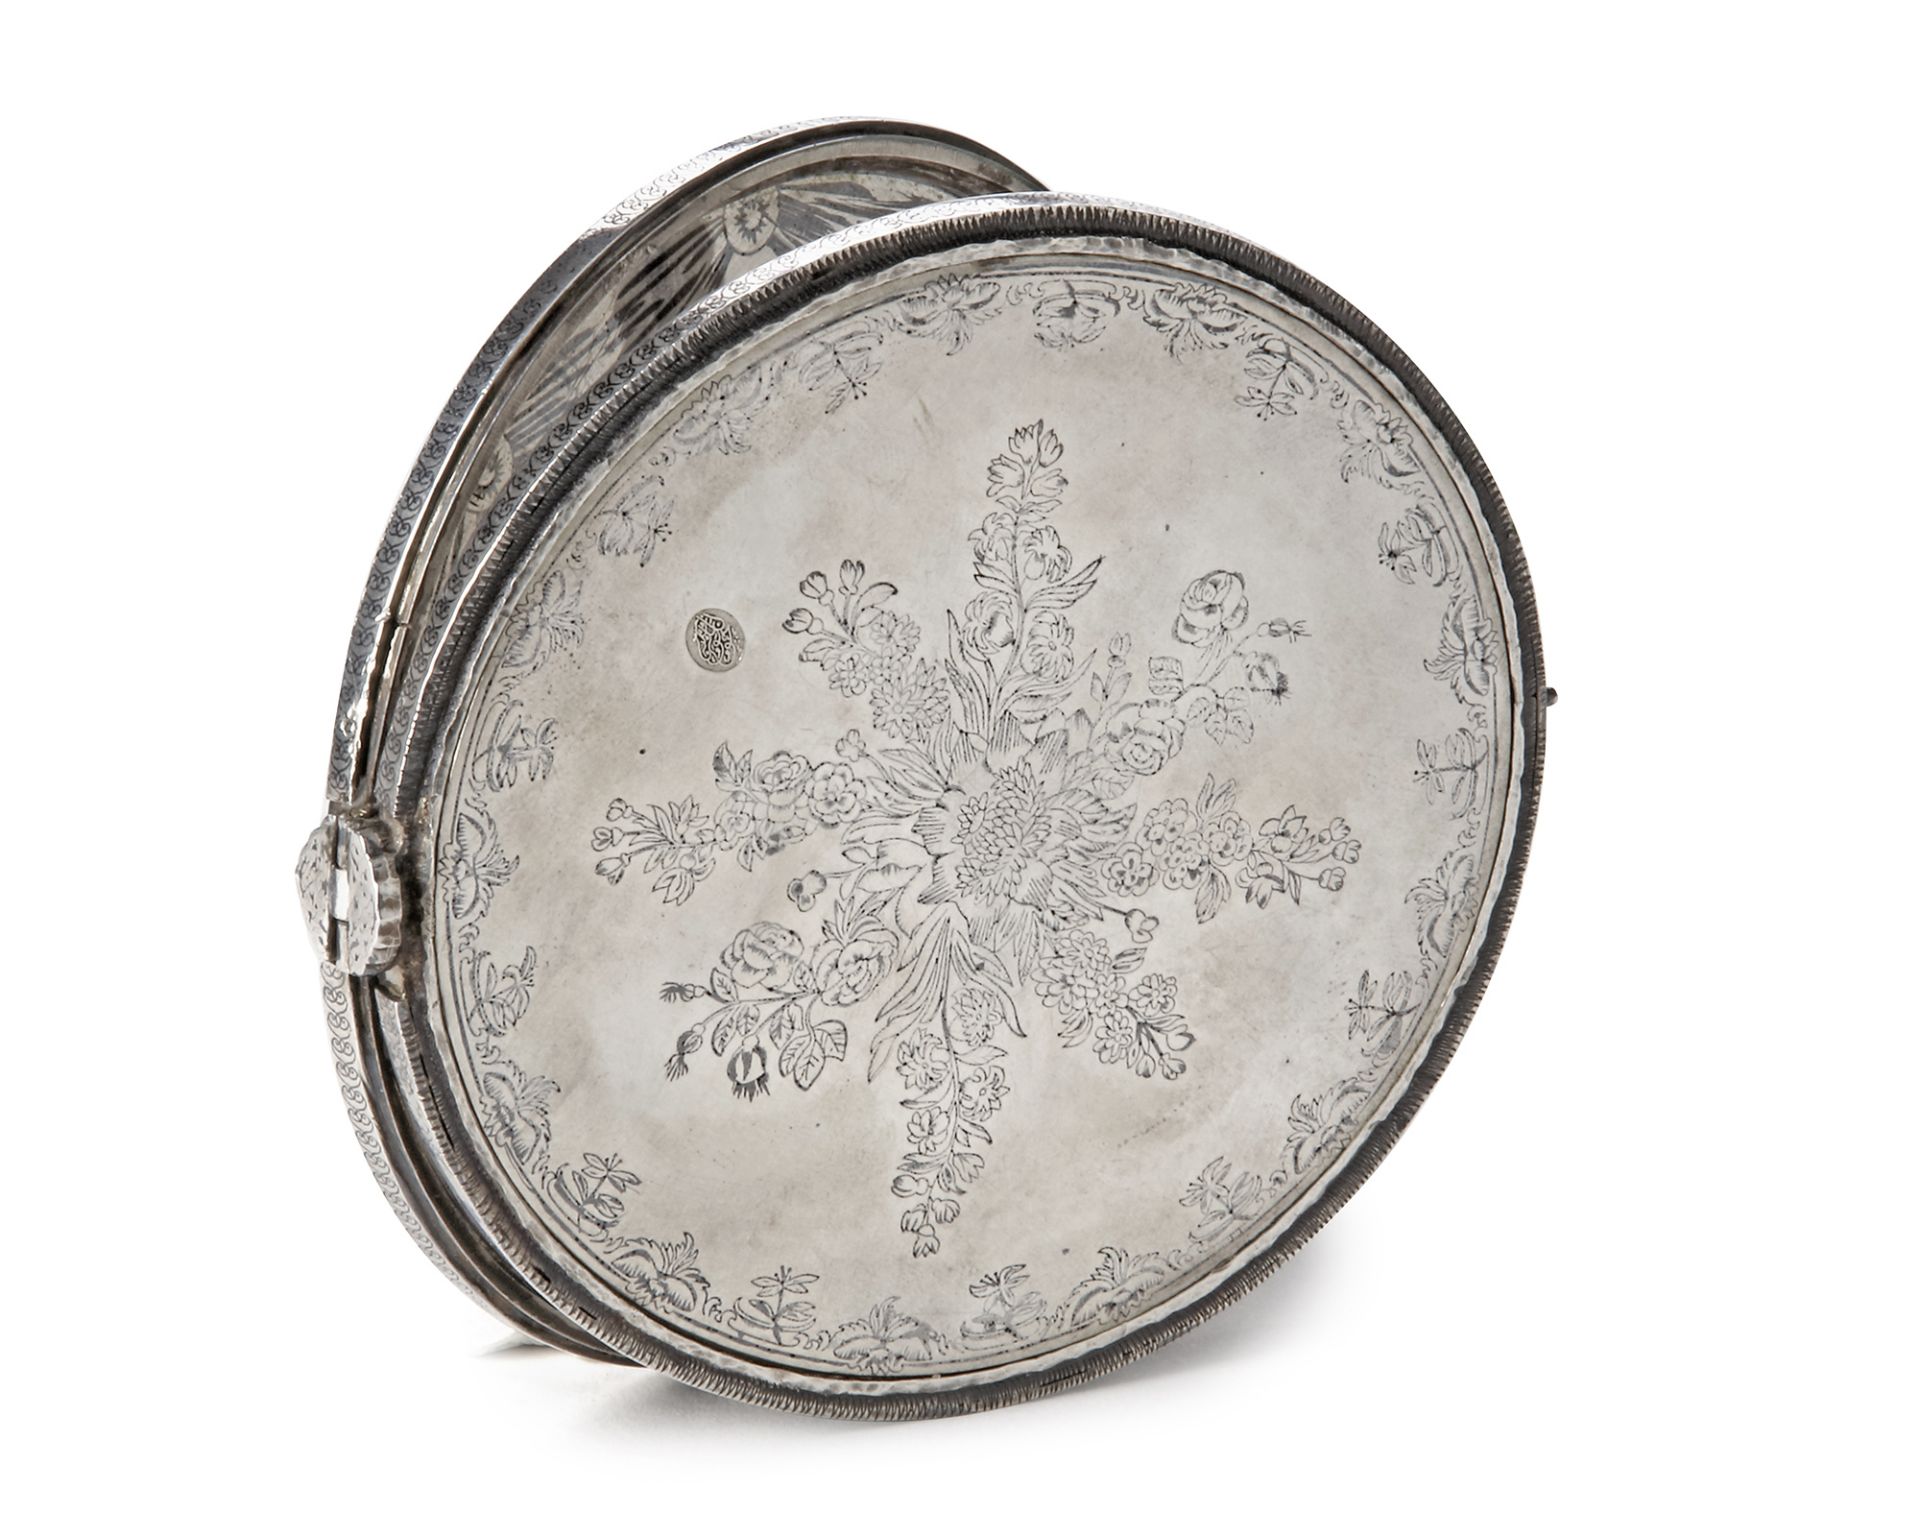 A SILVER PORTABLE FOLDABLE OTTOMAN QIBLA FINDER WITH COMPASS AND DOUBLE SUNDIAL, 19TH CENTURY - Image 7 of 7